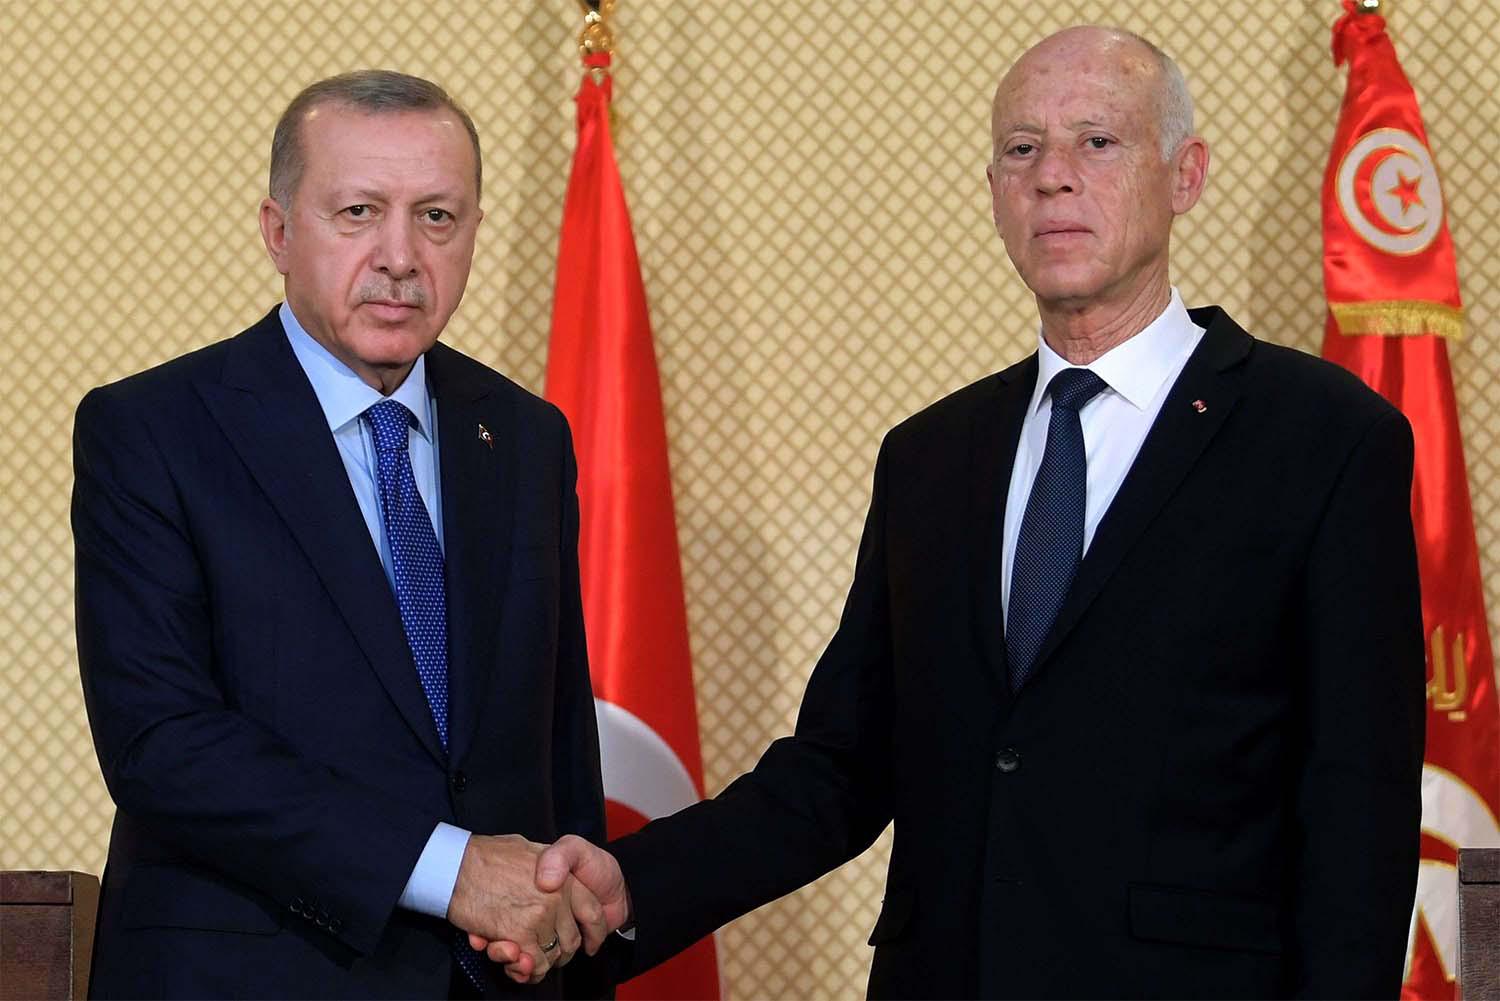 Tunisian President Kais Saied (R) shakes hands with Turkish President Recep Tayyip Erdogan during a joint press conference at the presidential palace in Carthage in December 2019